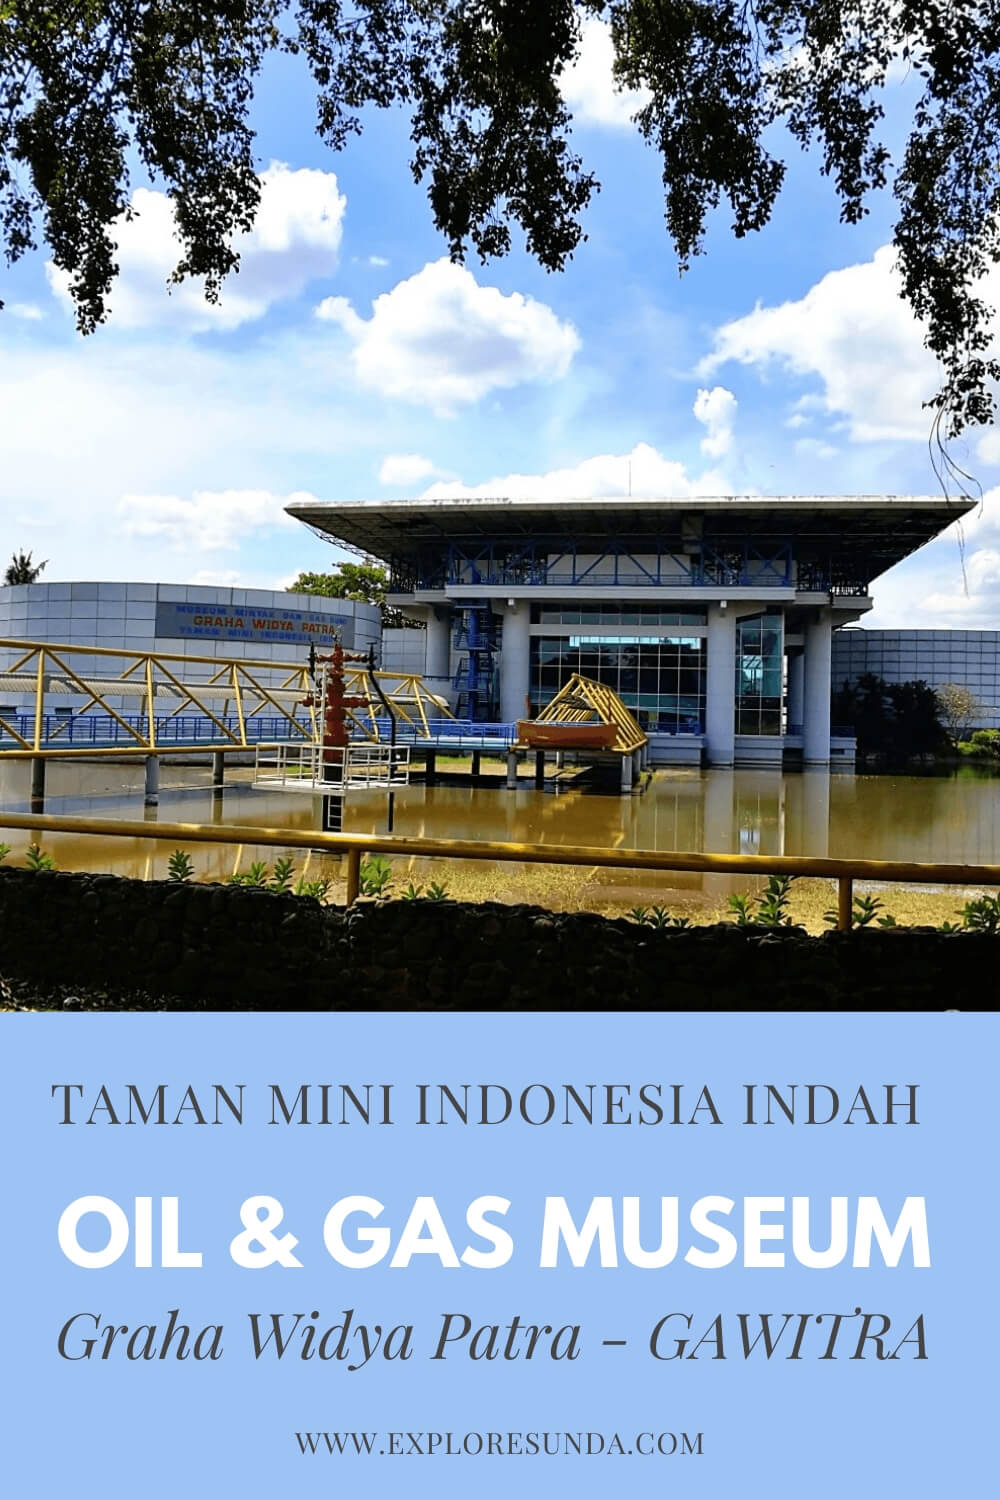 An overview of the Oil and Gas Museum a.k.a. Graha Widya Patra [Gawitra] in Taman Mini Indonesia Indah.